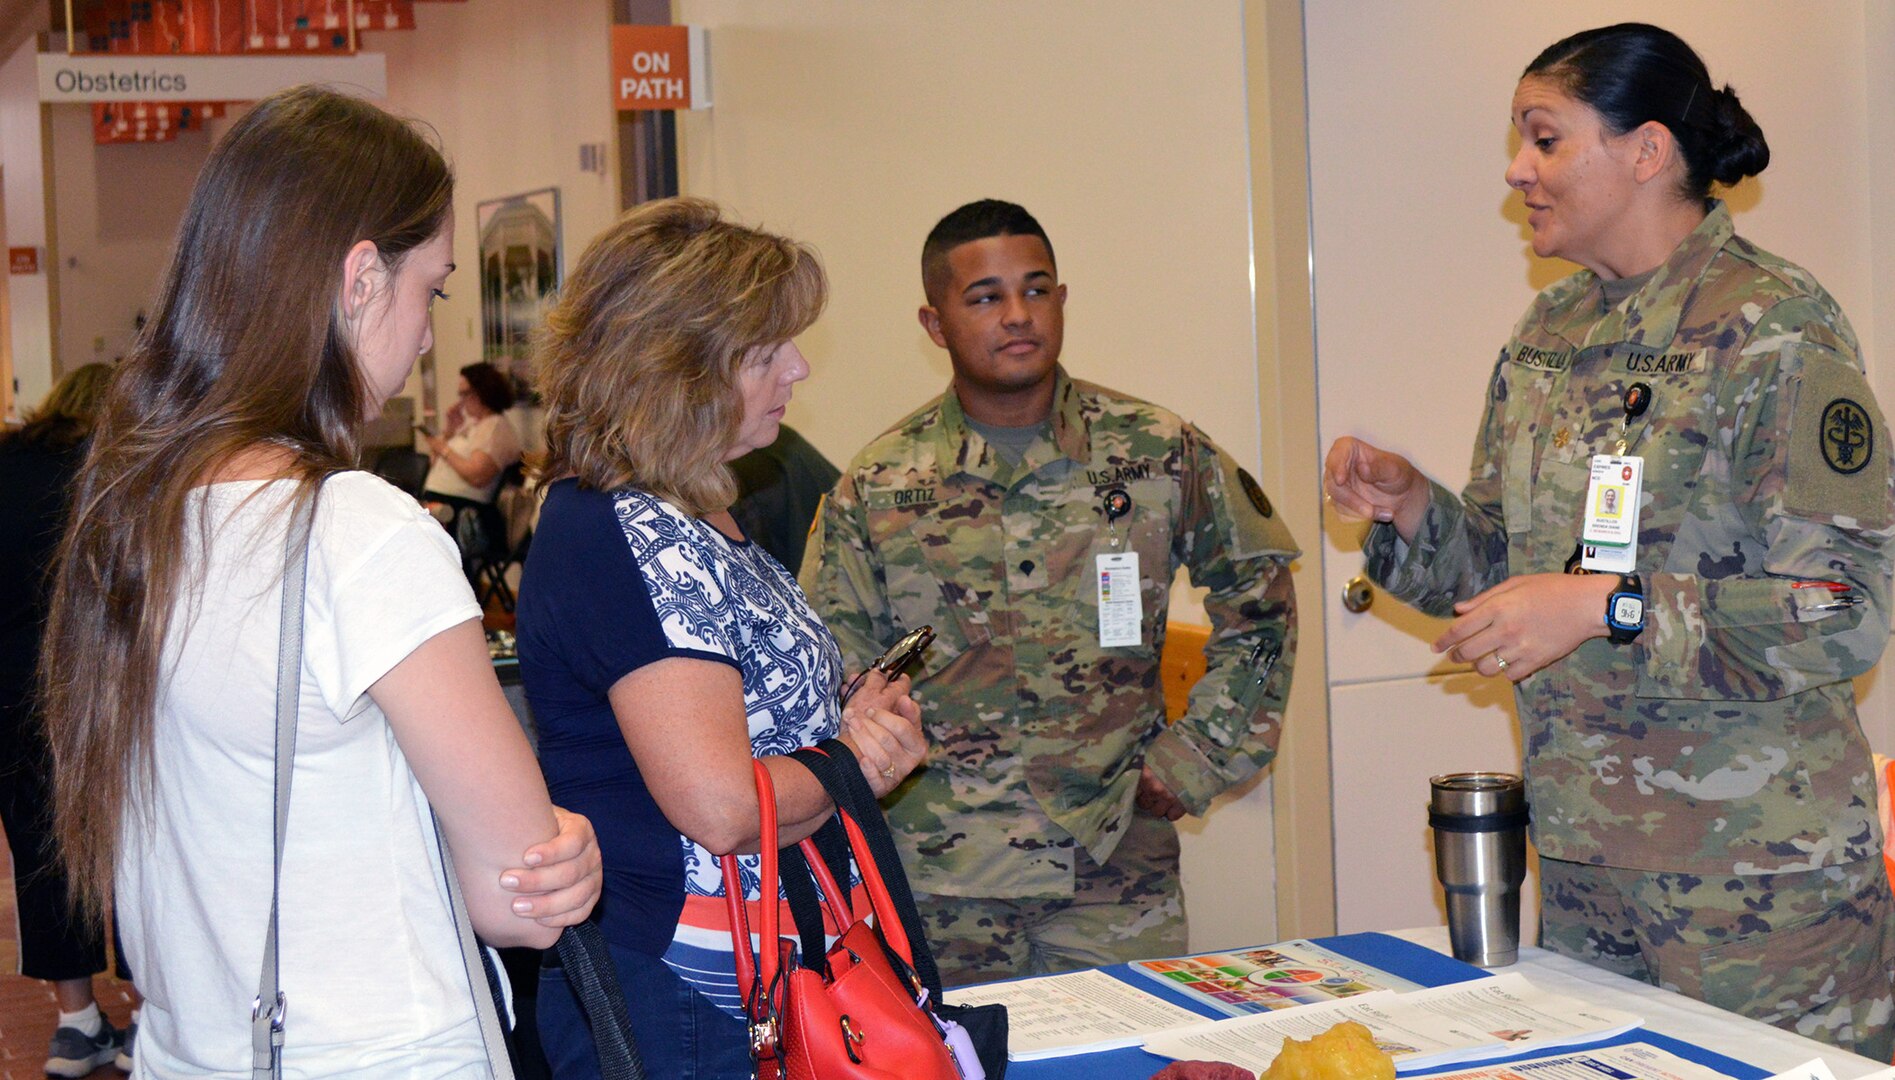 Carolyn and Hannah Wafford talk with Spc. Hector Ortiz and Maj. Brenda Bustillos, chief of education and research branch, at the nutrition table May 19 during the Brooke Army Medical Center Women’s Health Fair.